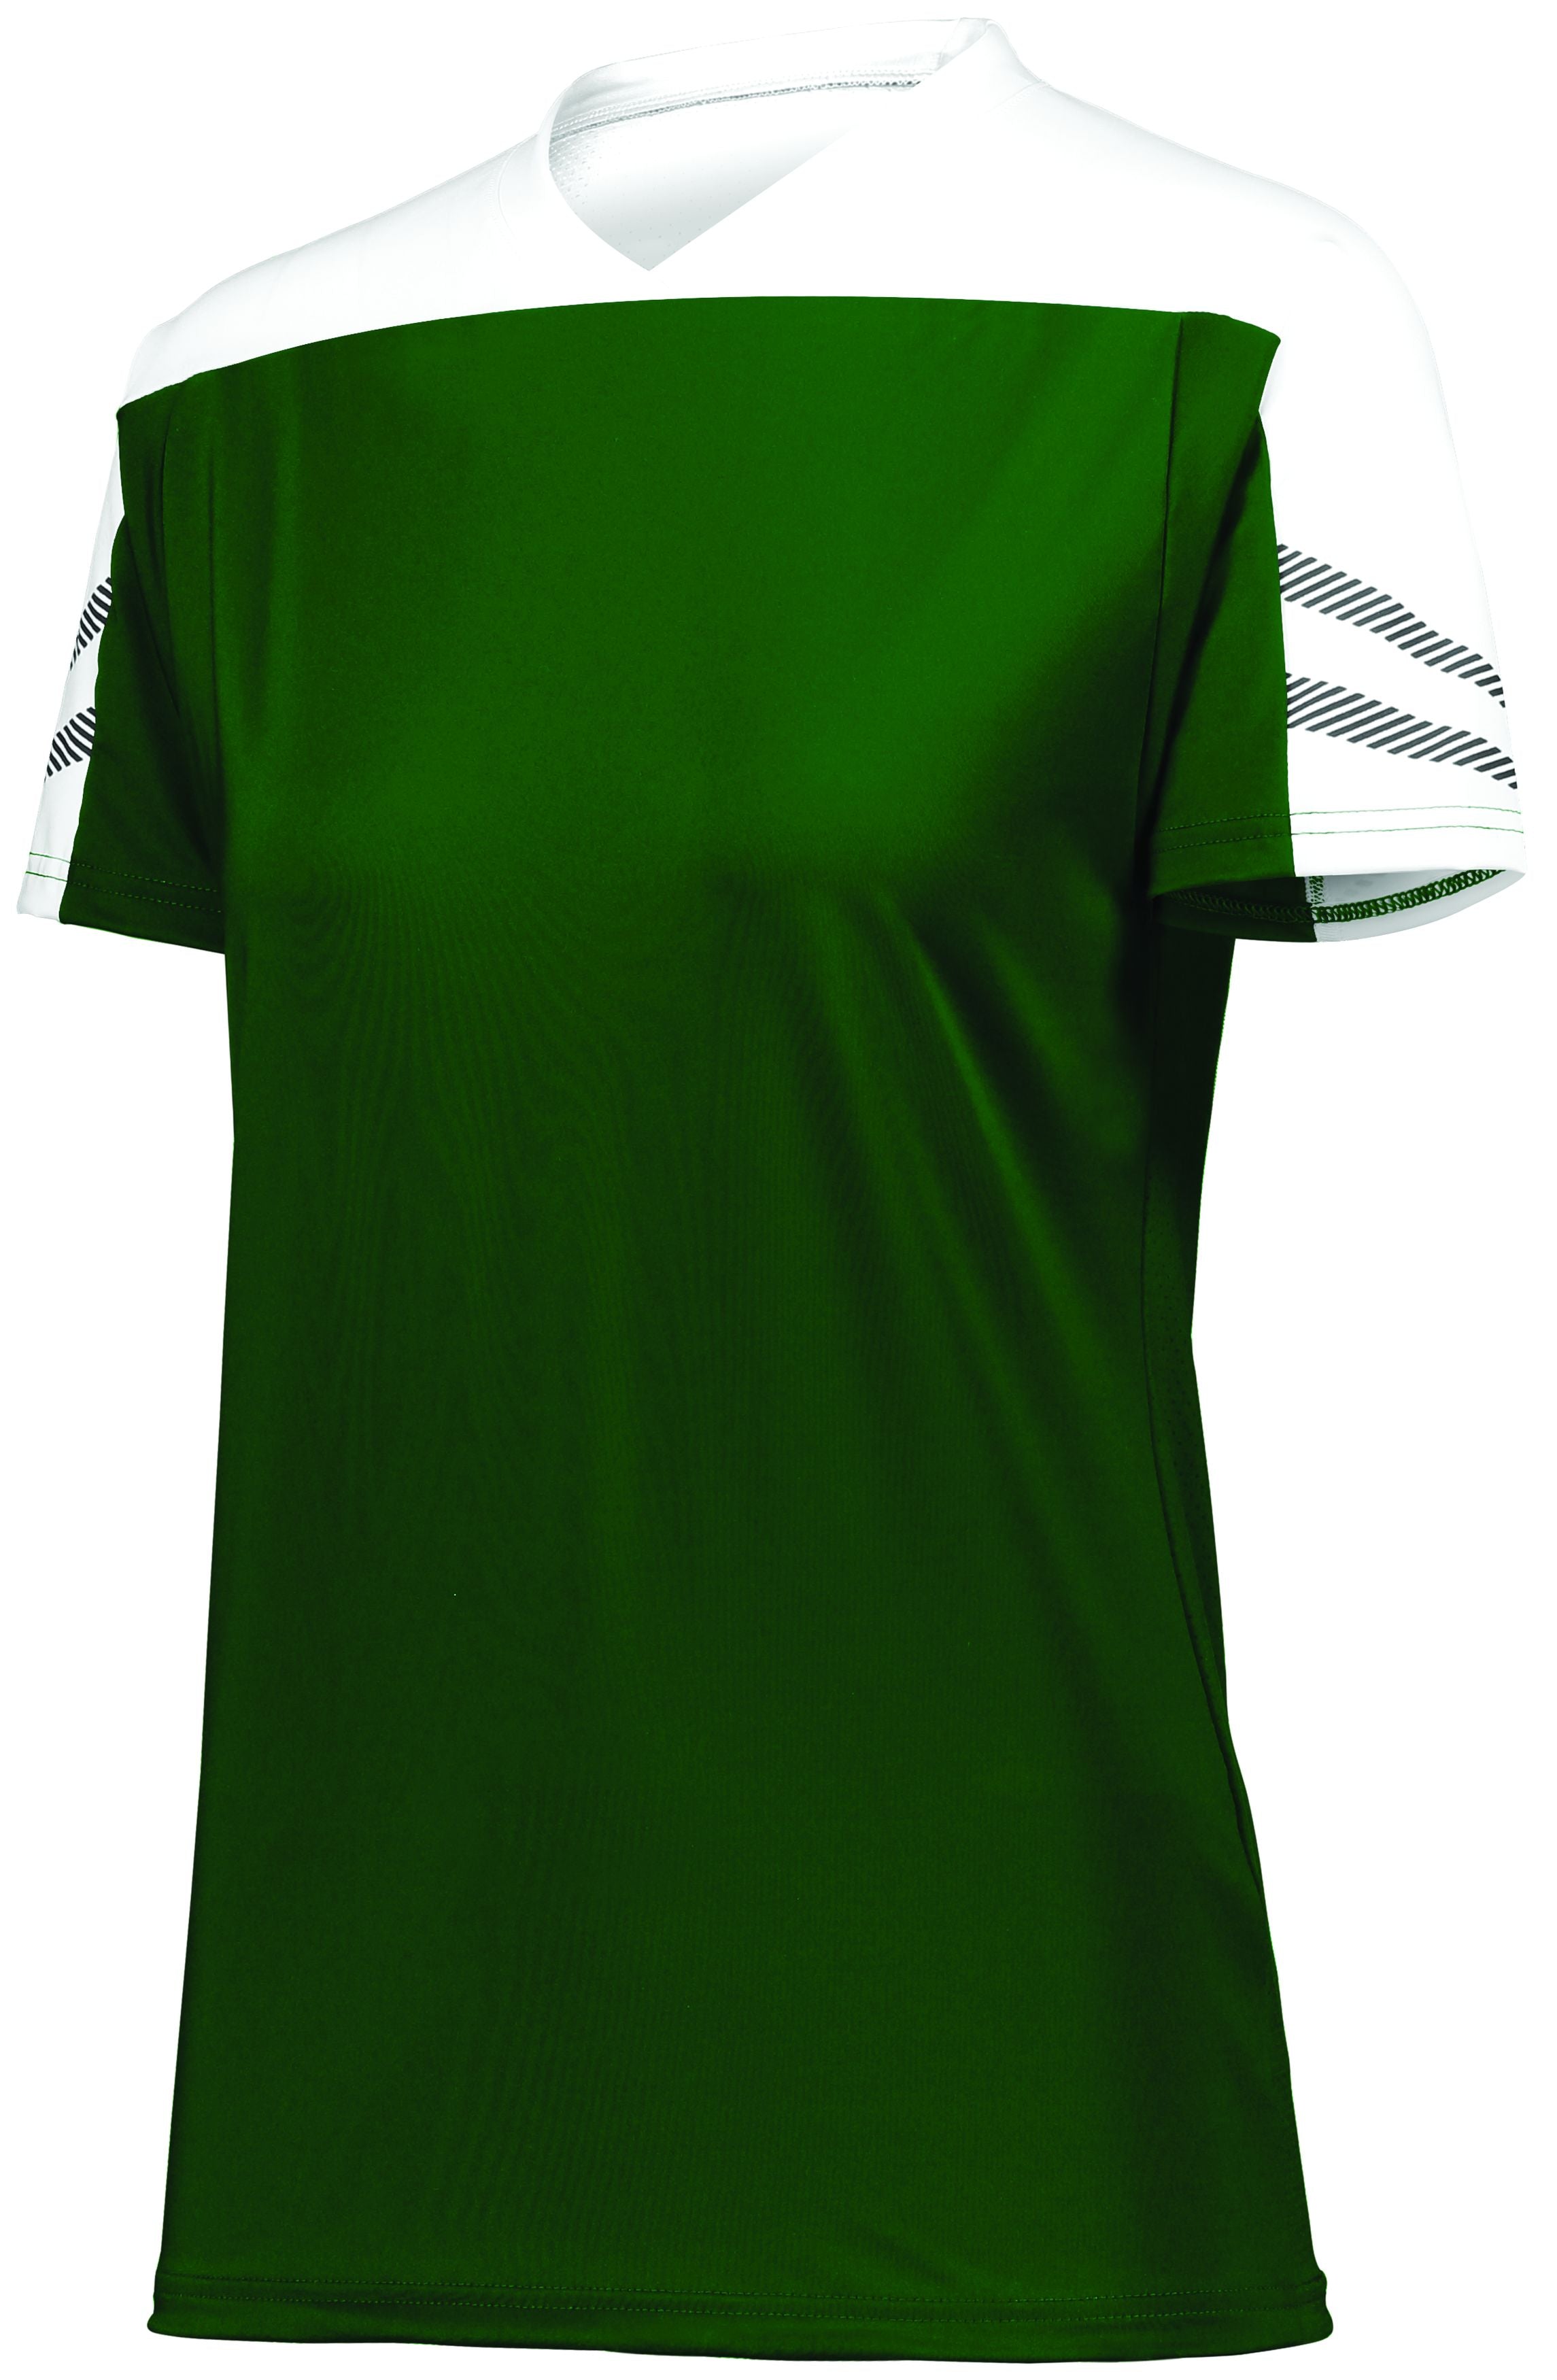 High 5 Ladies Anfield Soccer Jersey in Forest/White/Black  -Part of the Ladies, Ladies-Jersey, High5-Products, Soccer, Shirts, All-Sports-1 product lines at KanaleyCreations.com